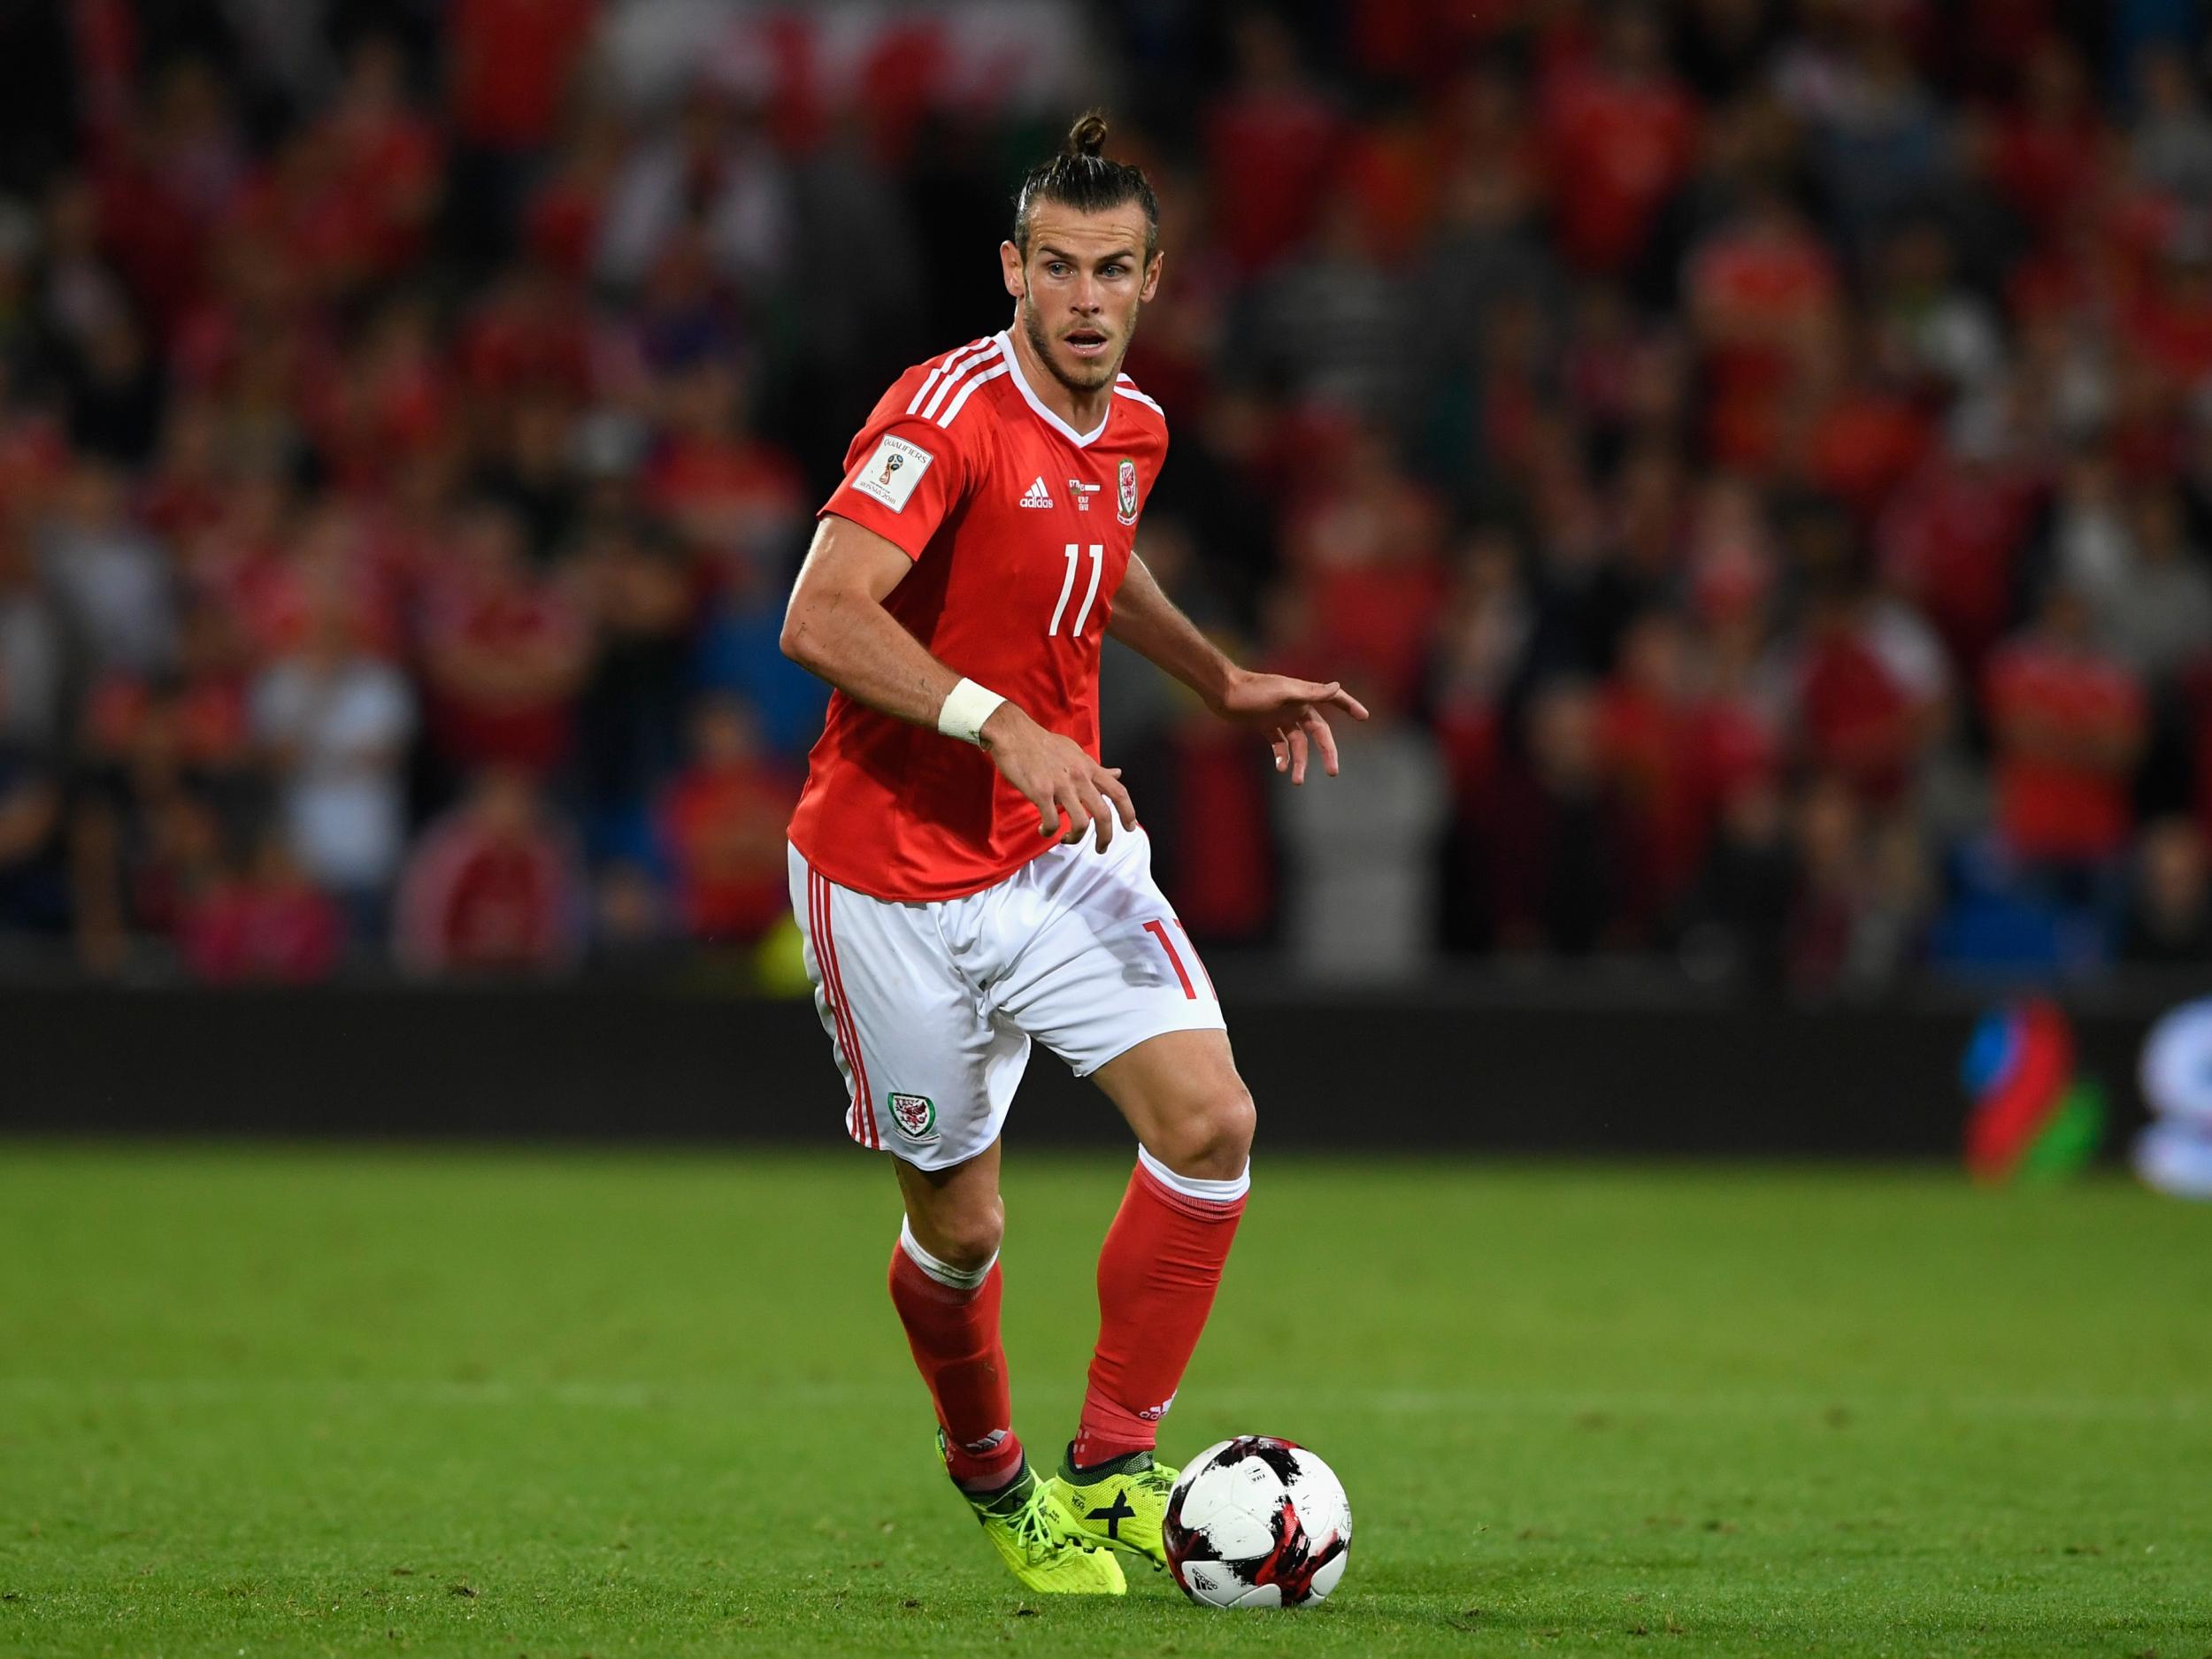 This could be Bale's last chance at a World Cup